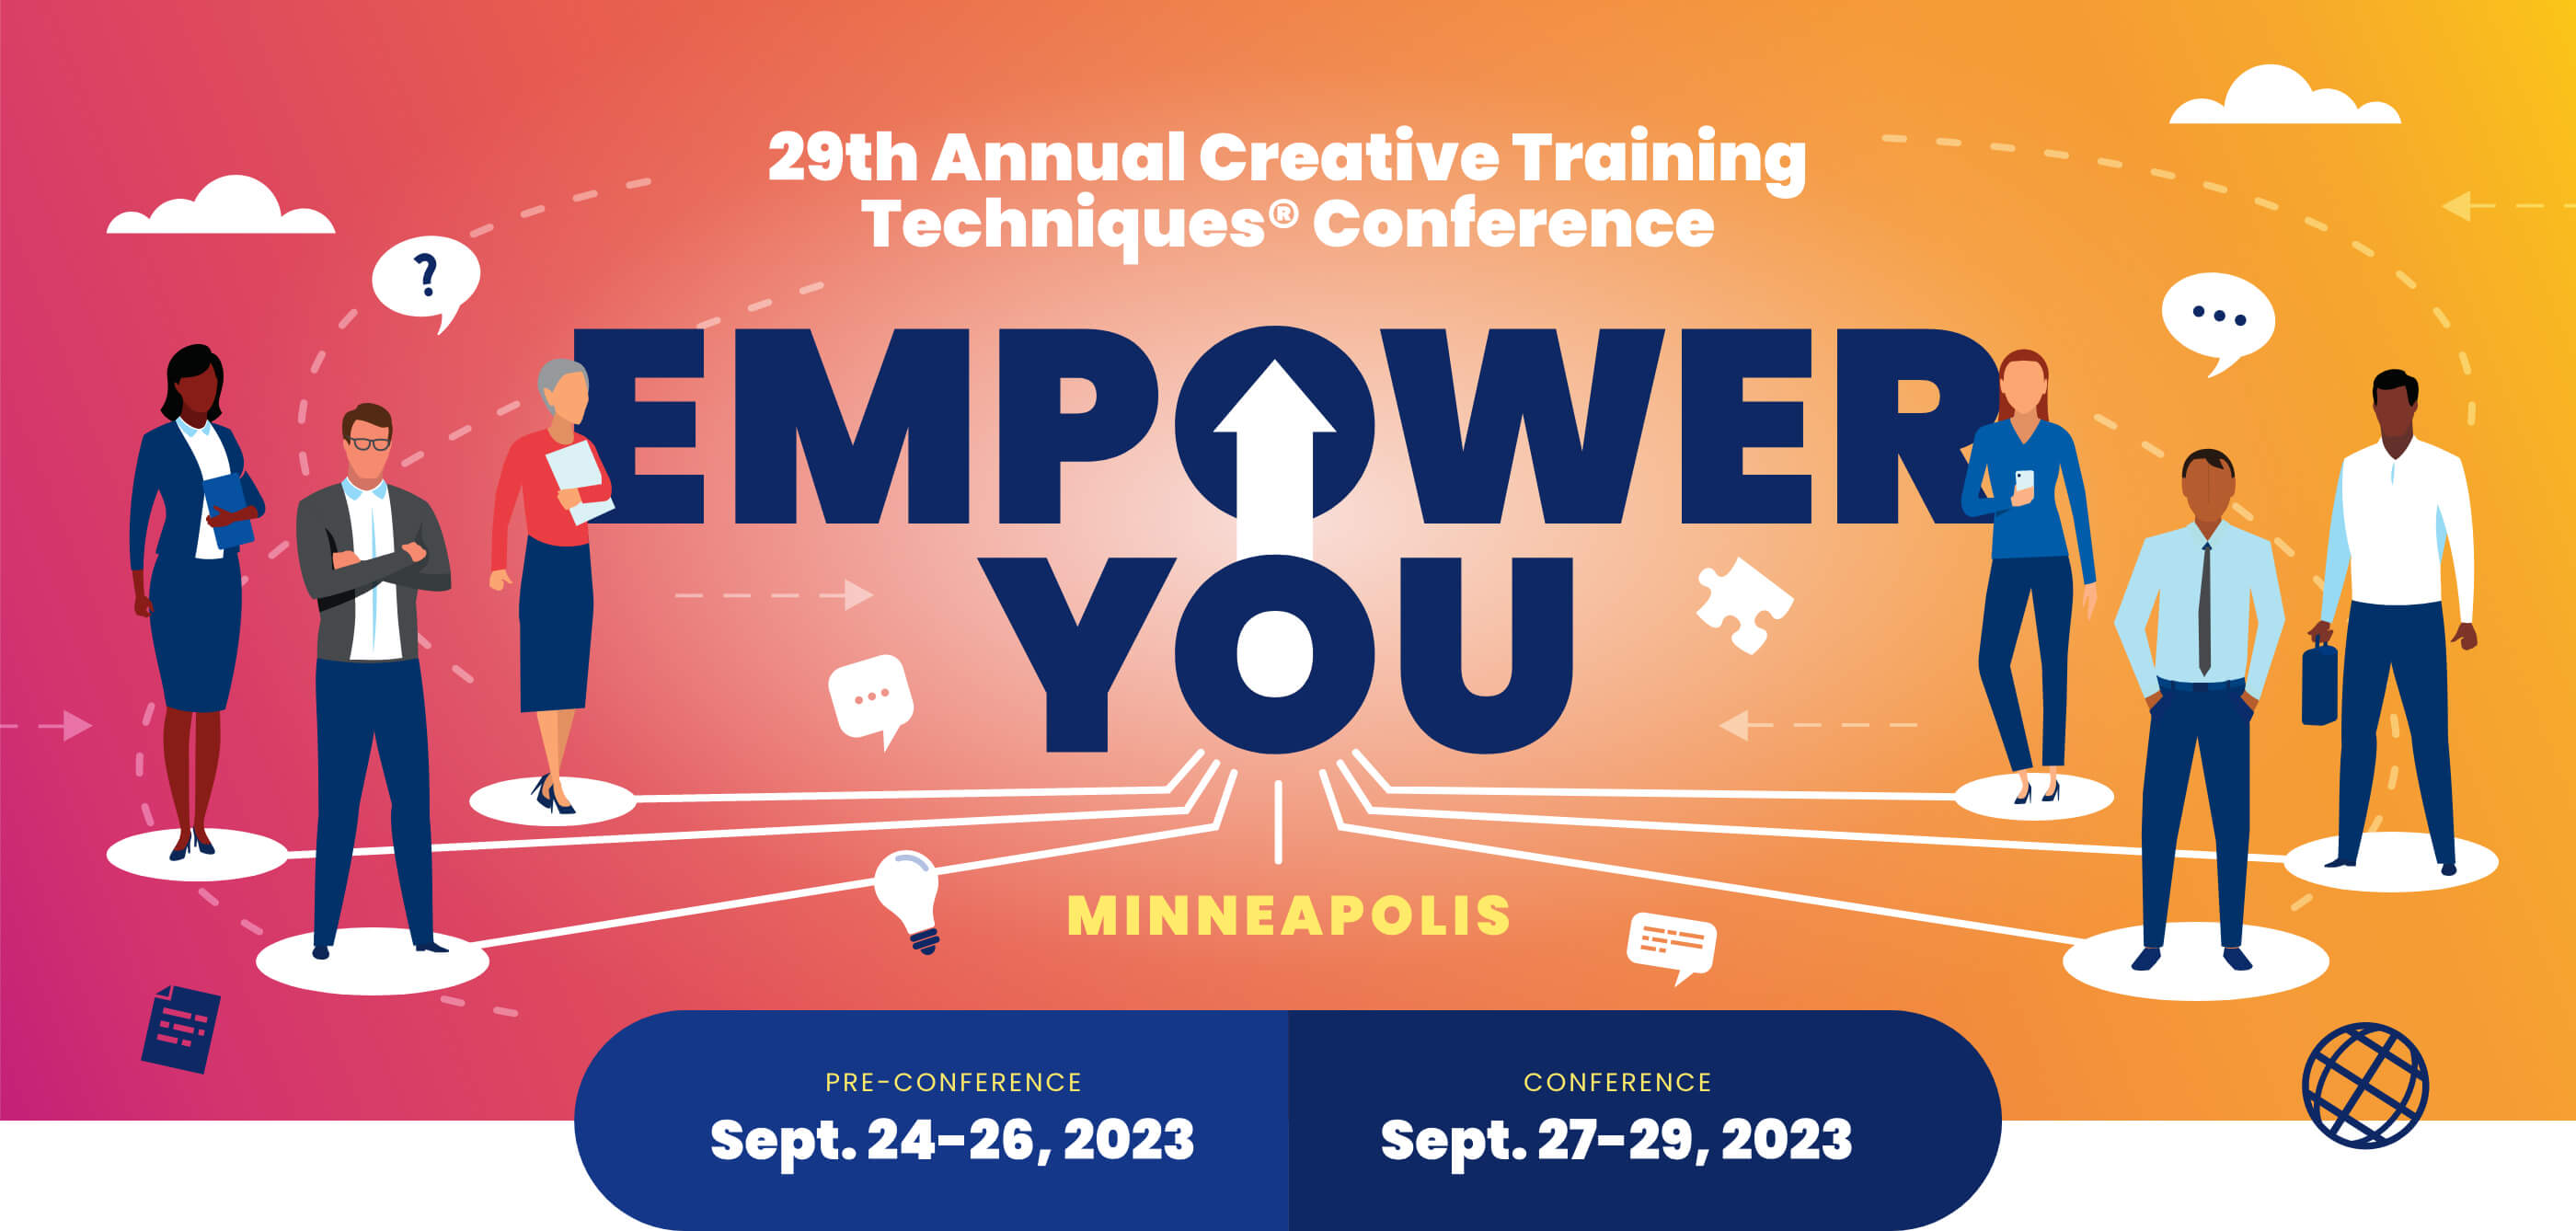 29th annual creative training techniques conference. minneapolis. sept 24-29 2023.